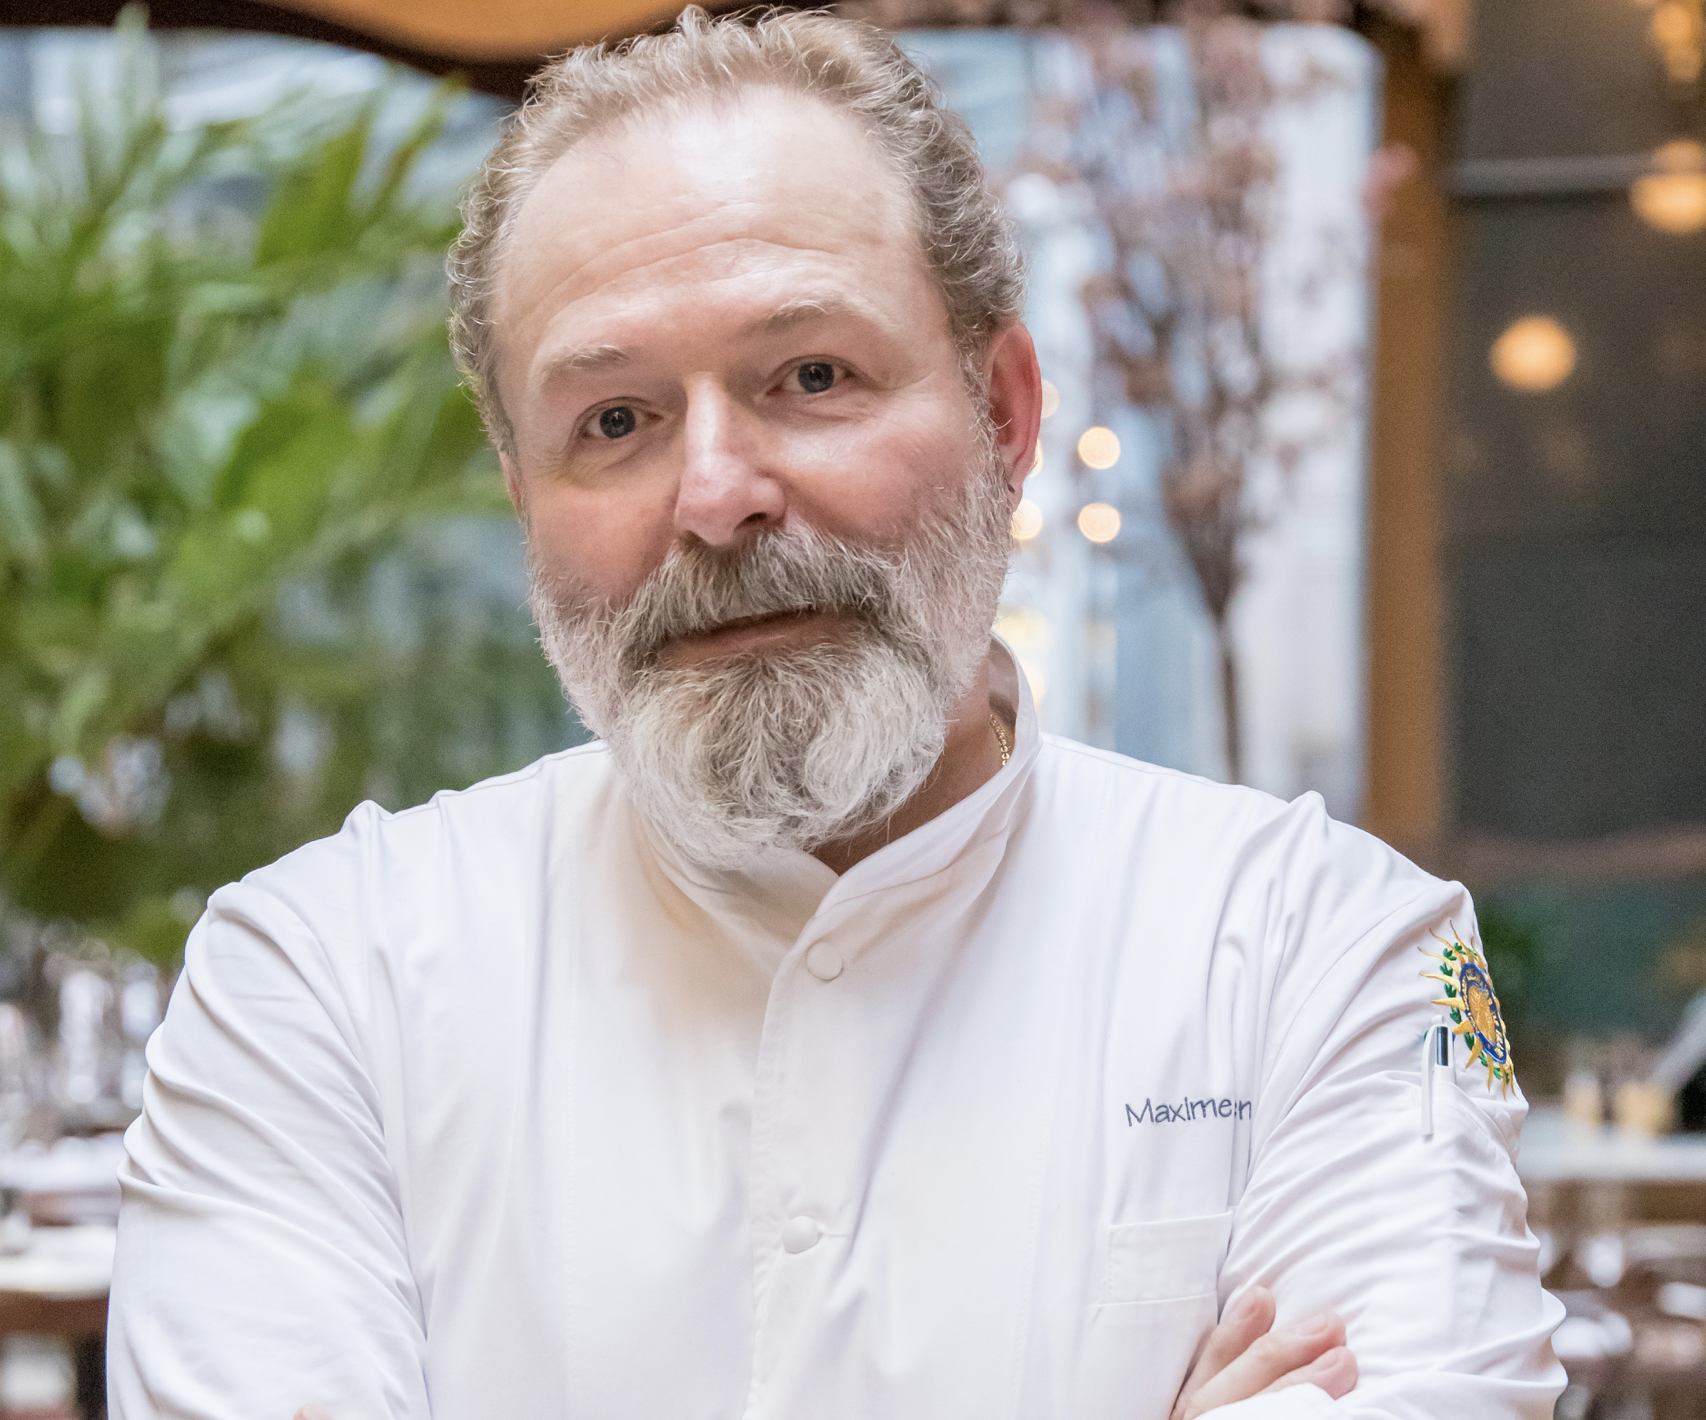 Head to The City: Manhattan NYC’s La Grande Boucherie Chef Maxime Kien Reveals inspiration from Past Generations of Chefs